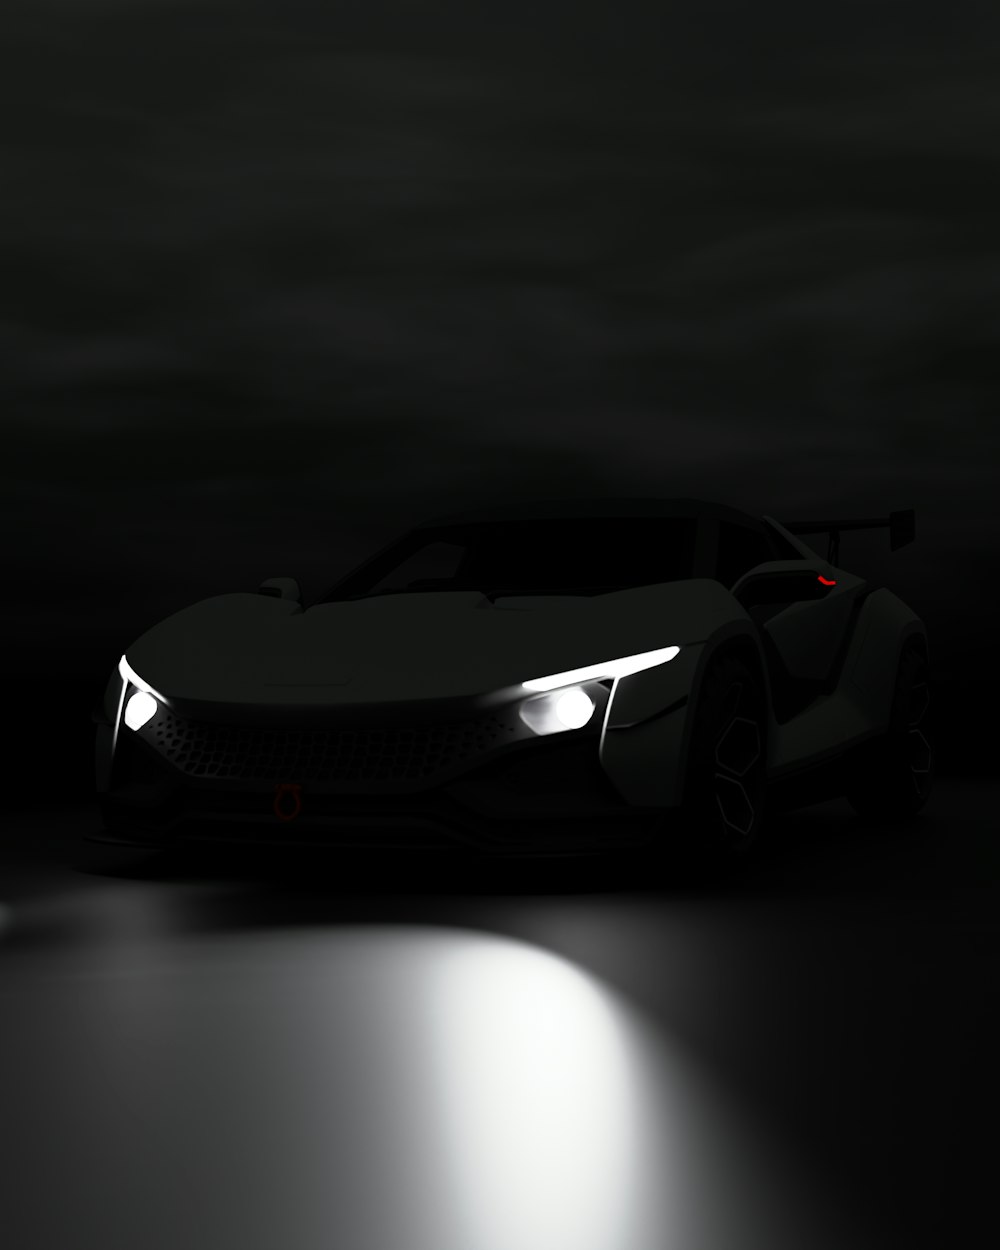 a car is shown in the dark with its headlights on